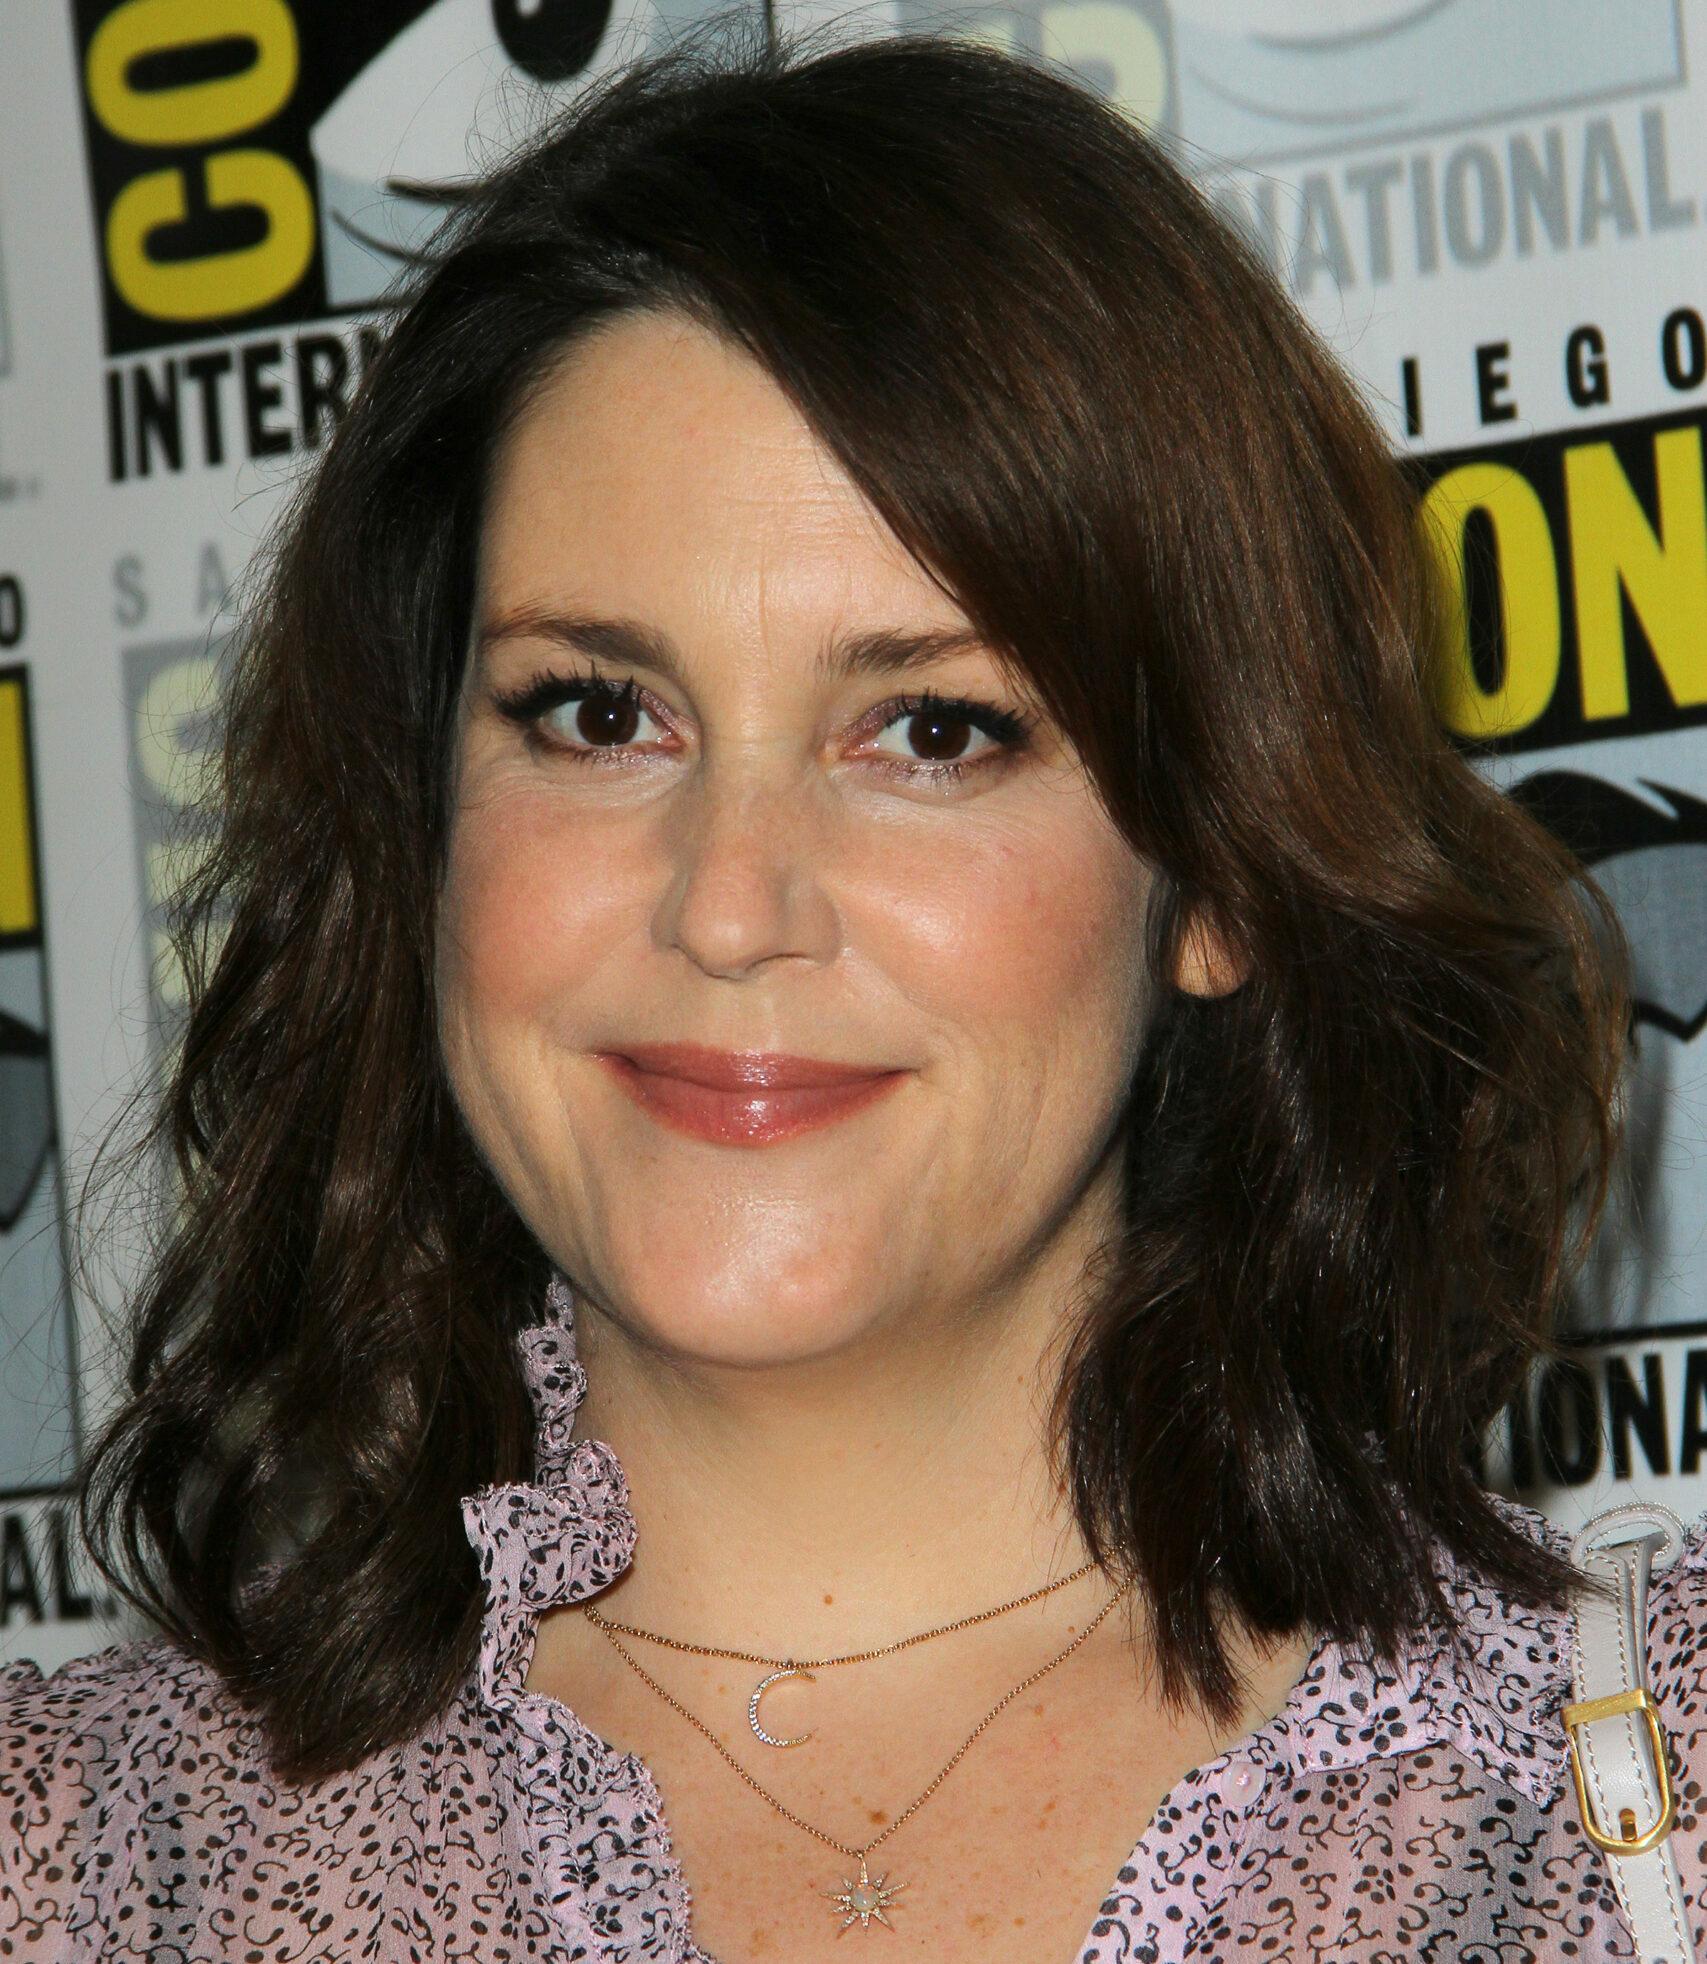 Melanie Lynskey at the "Castle Rock" Press Line at the Comic-Con International on July 20, 2018 in San Diego, CA